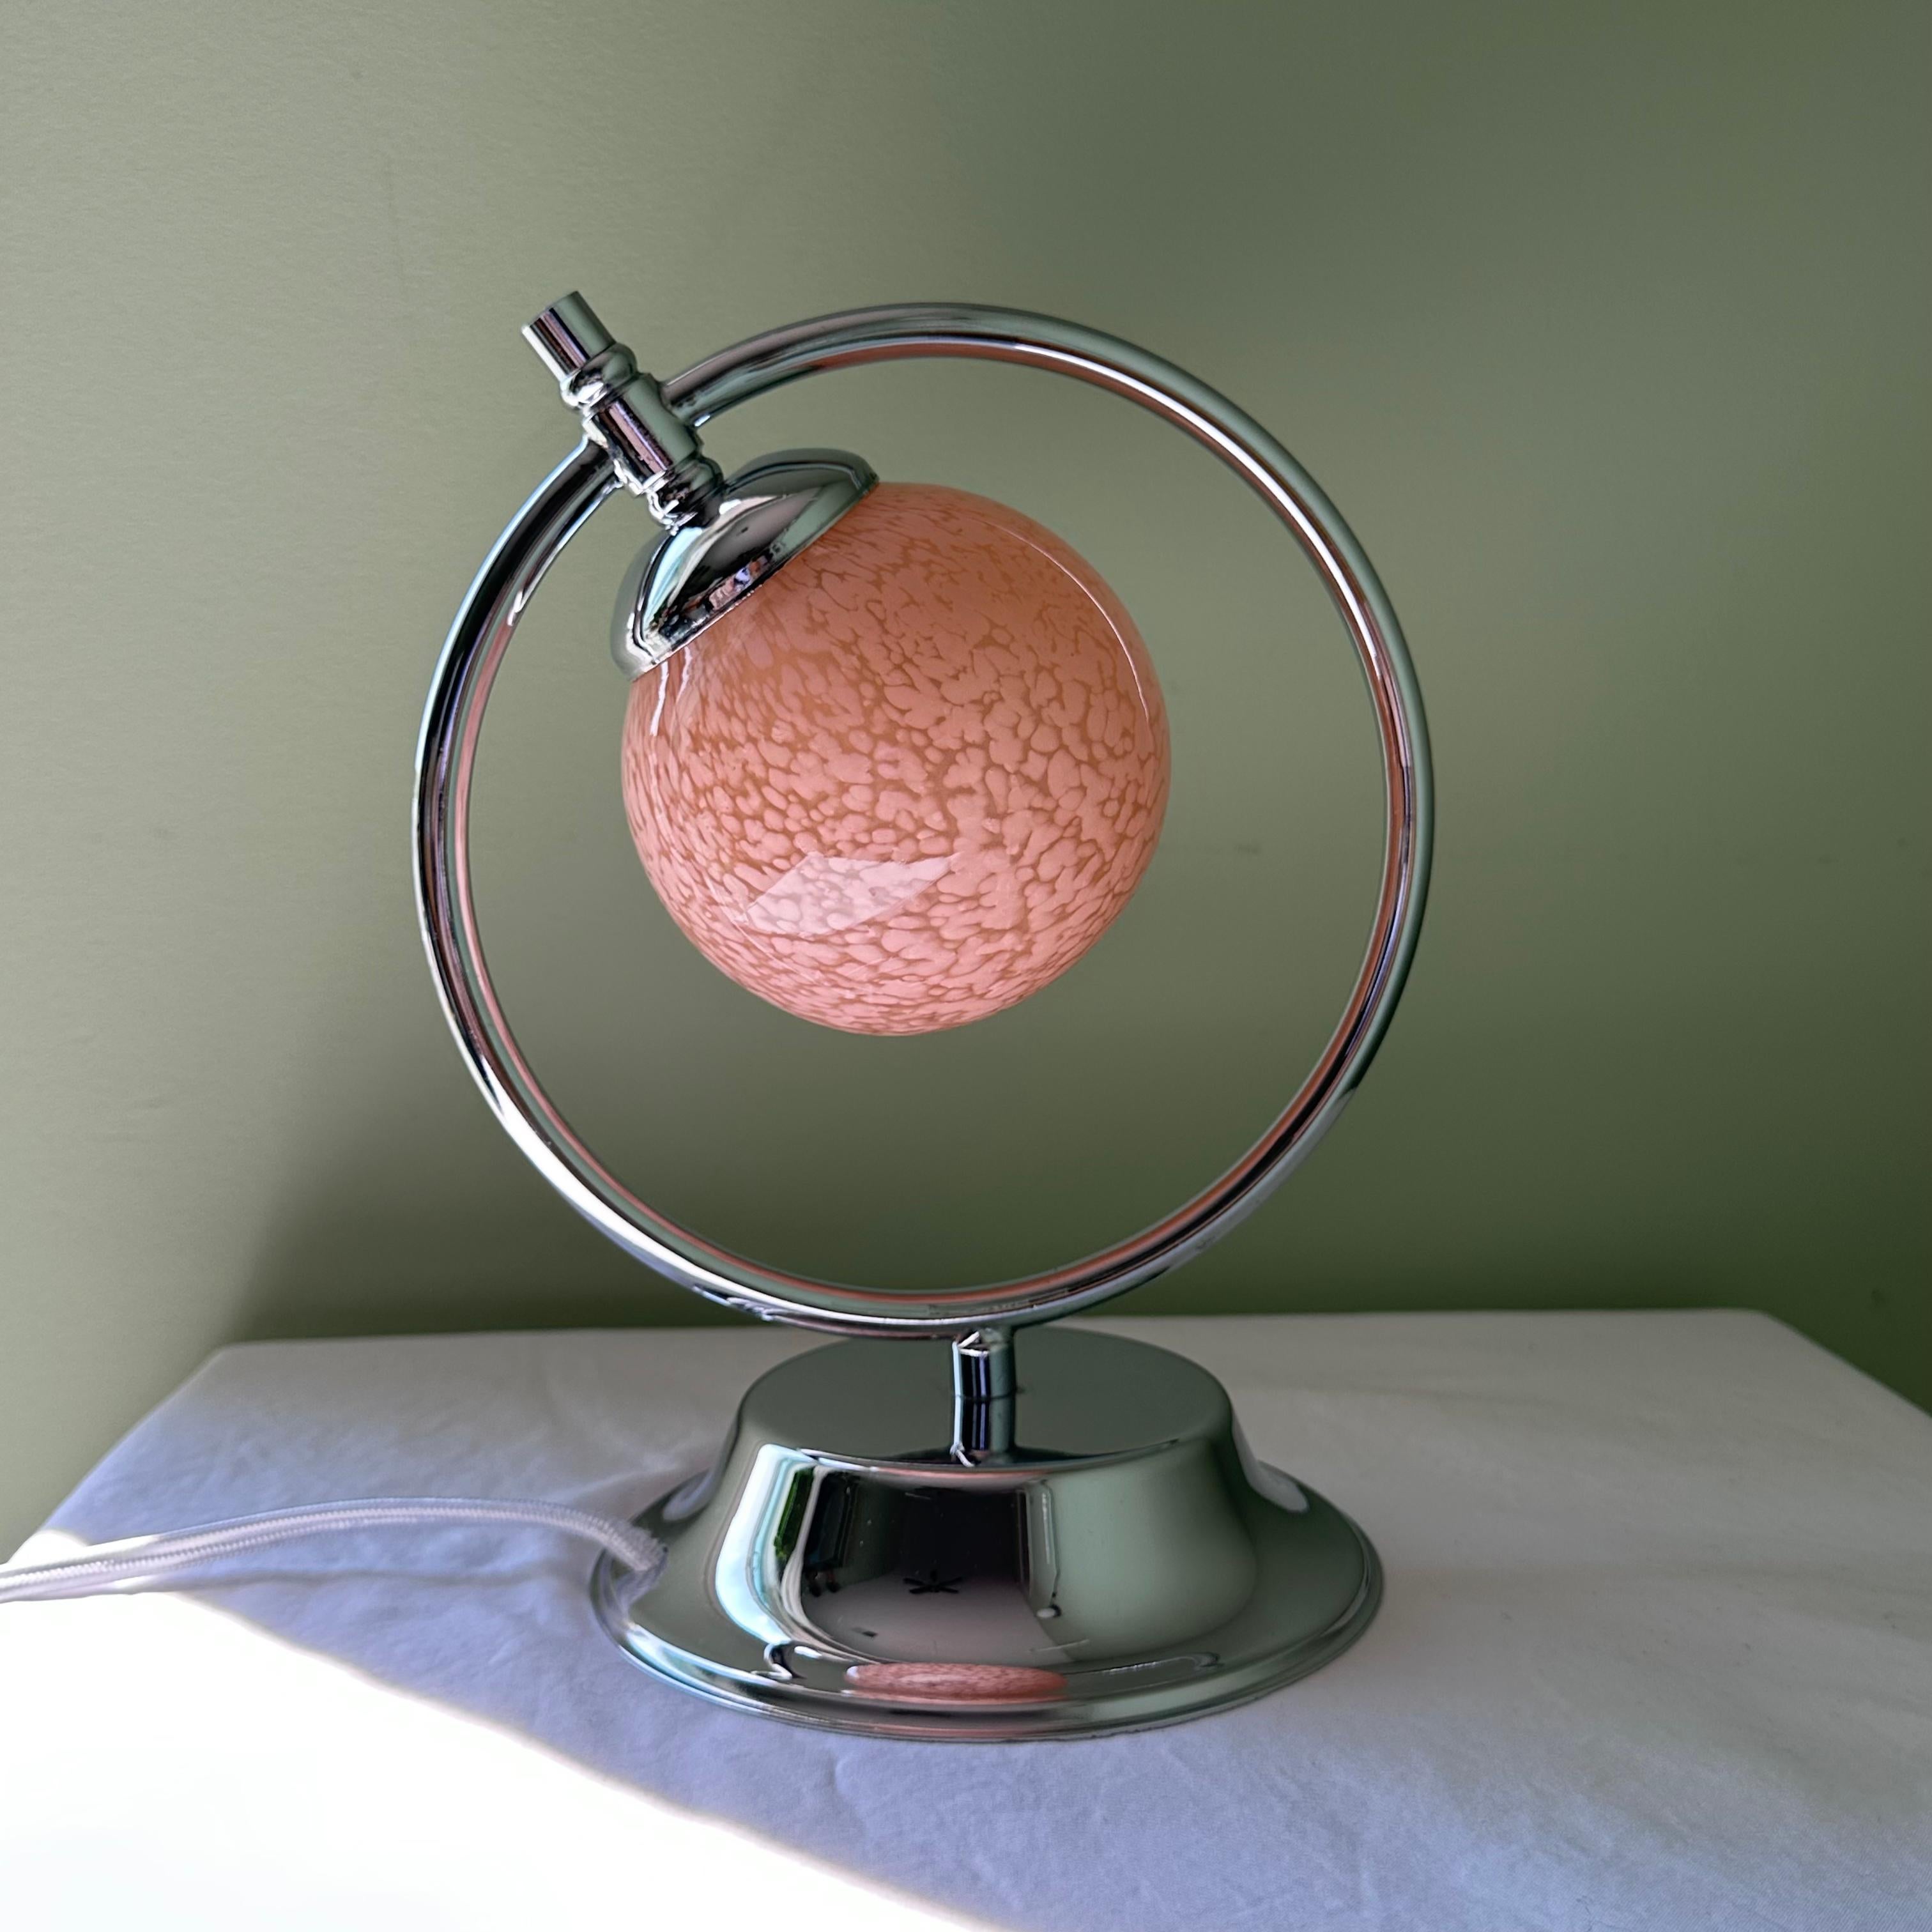 Absolutely stunning vintage Art Deco Modernist style chrome and pink glass table lamp. Petite and round, this 